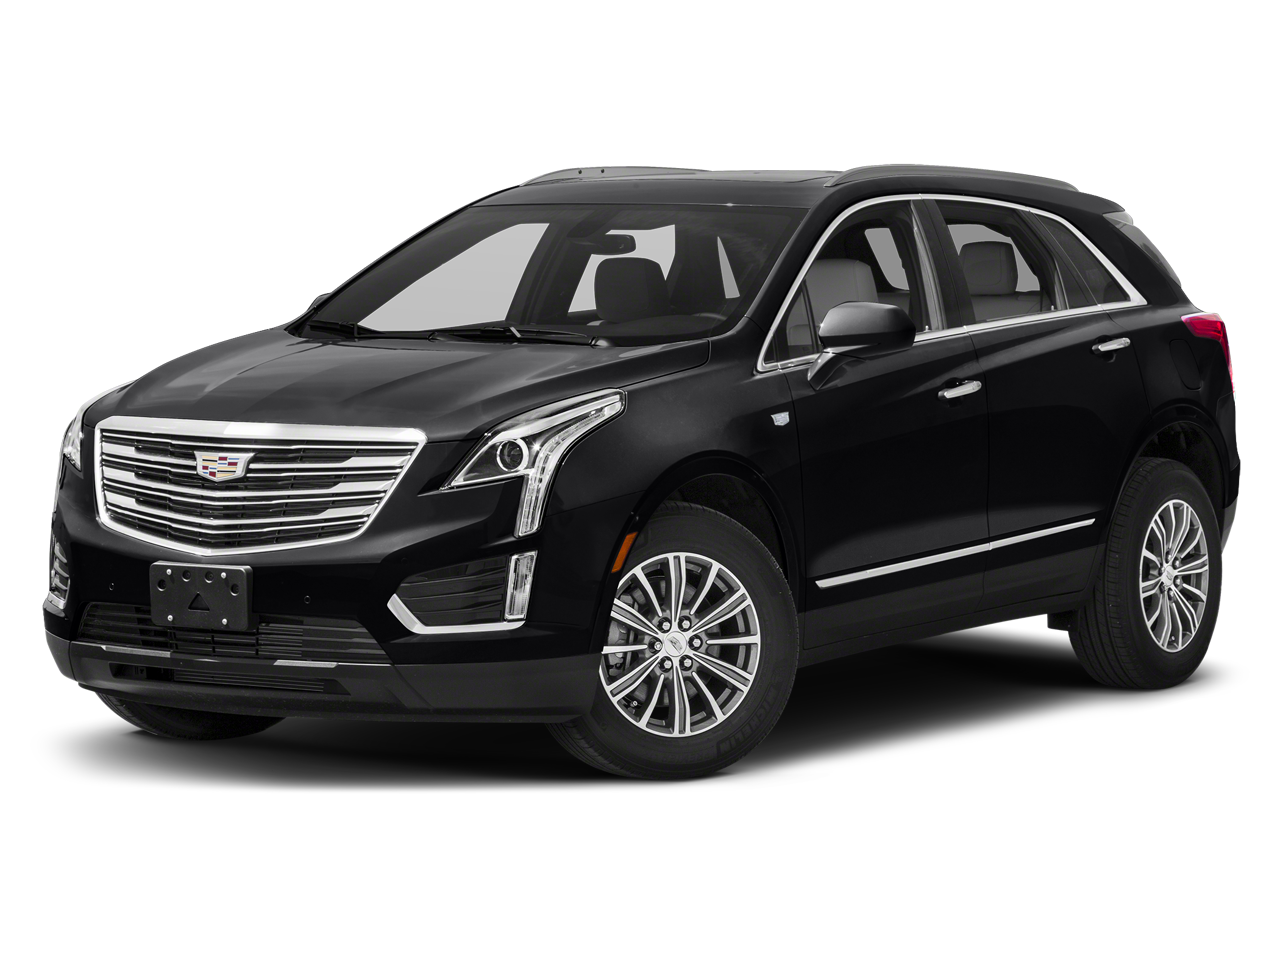 2019 Cadillac XT5 Luxury AWD NAVIGATION PANORAMIC MOONROOF HTD LEATHER